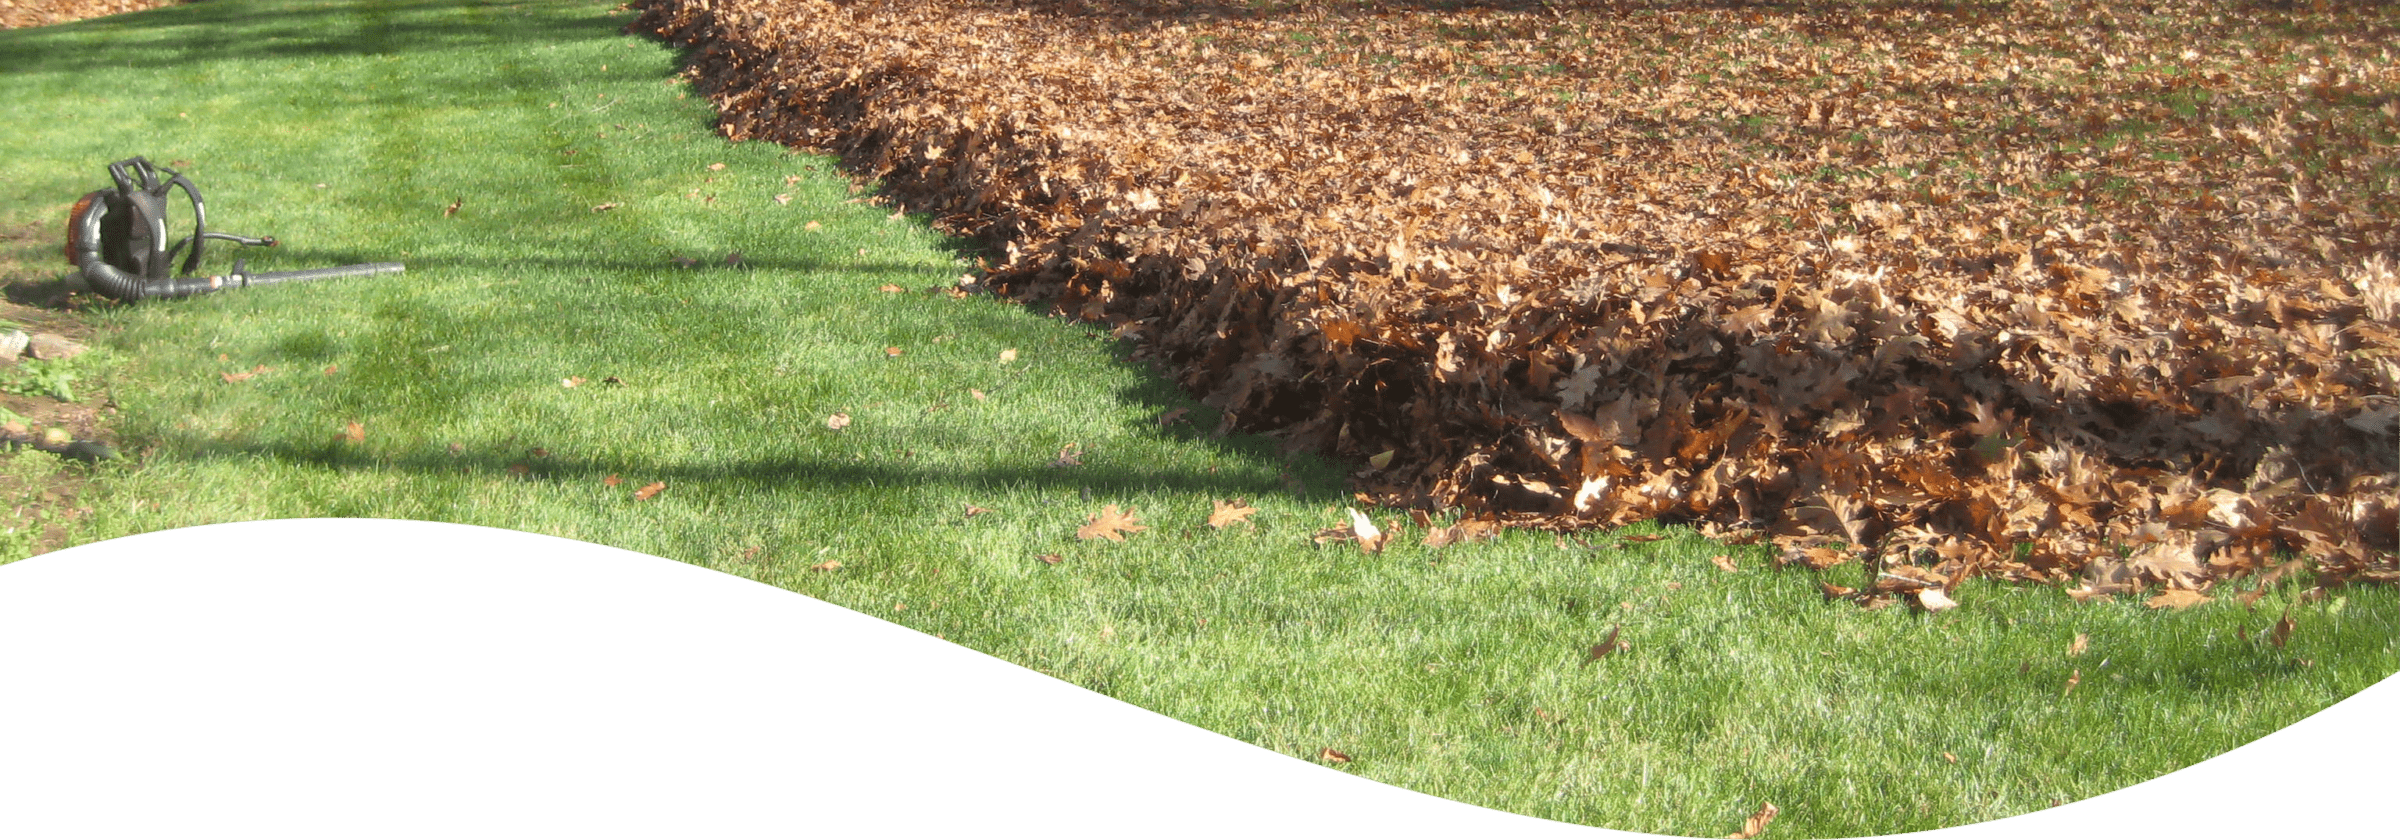 The image shows a neat lawn with a leaf blower on the left and a large pile of gathered autumn leaves on the right, indicating yard maintenance.